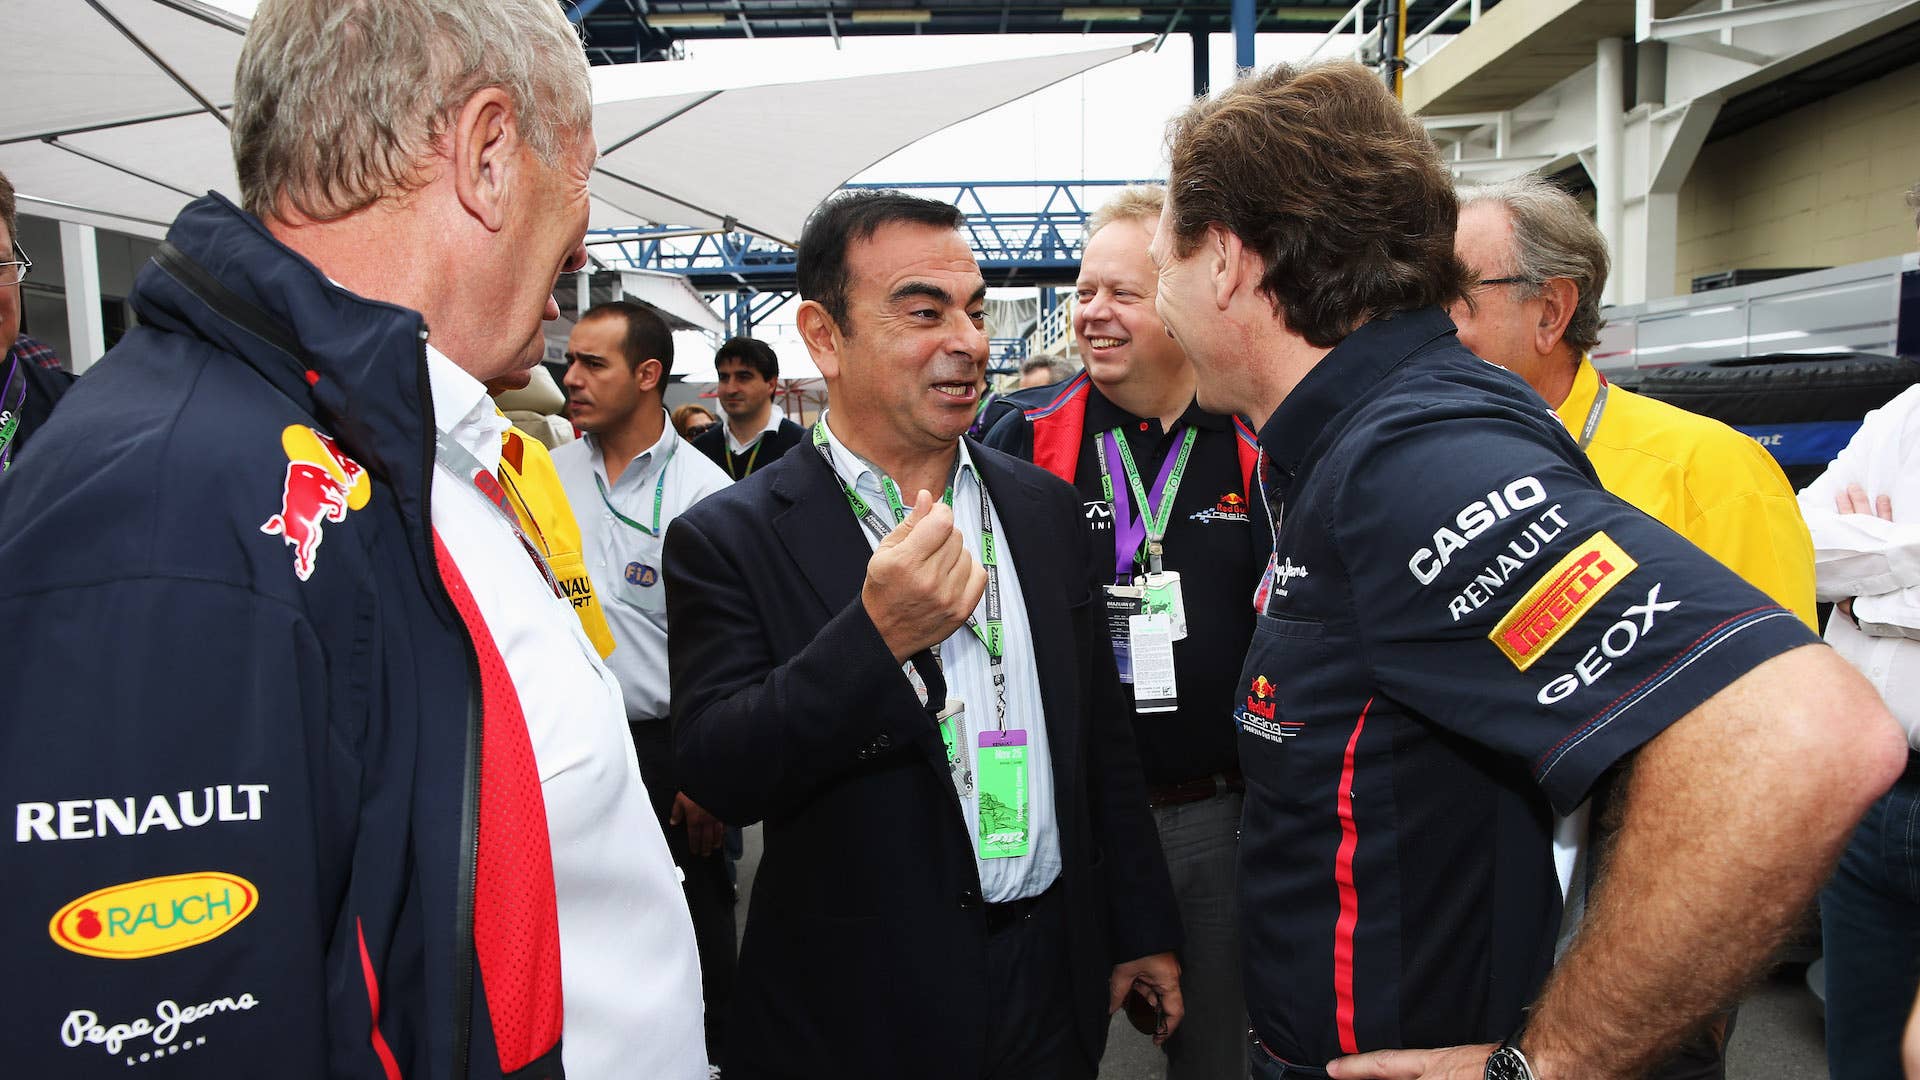 'I Have No Interest in F1,' Carlos Ghosn Told Red Bull During Renault ...